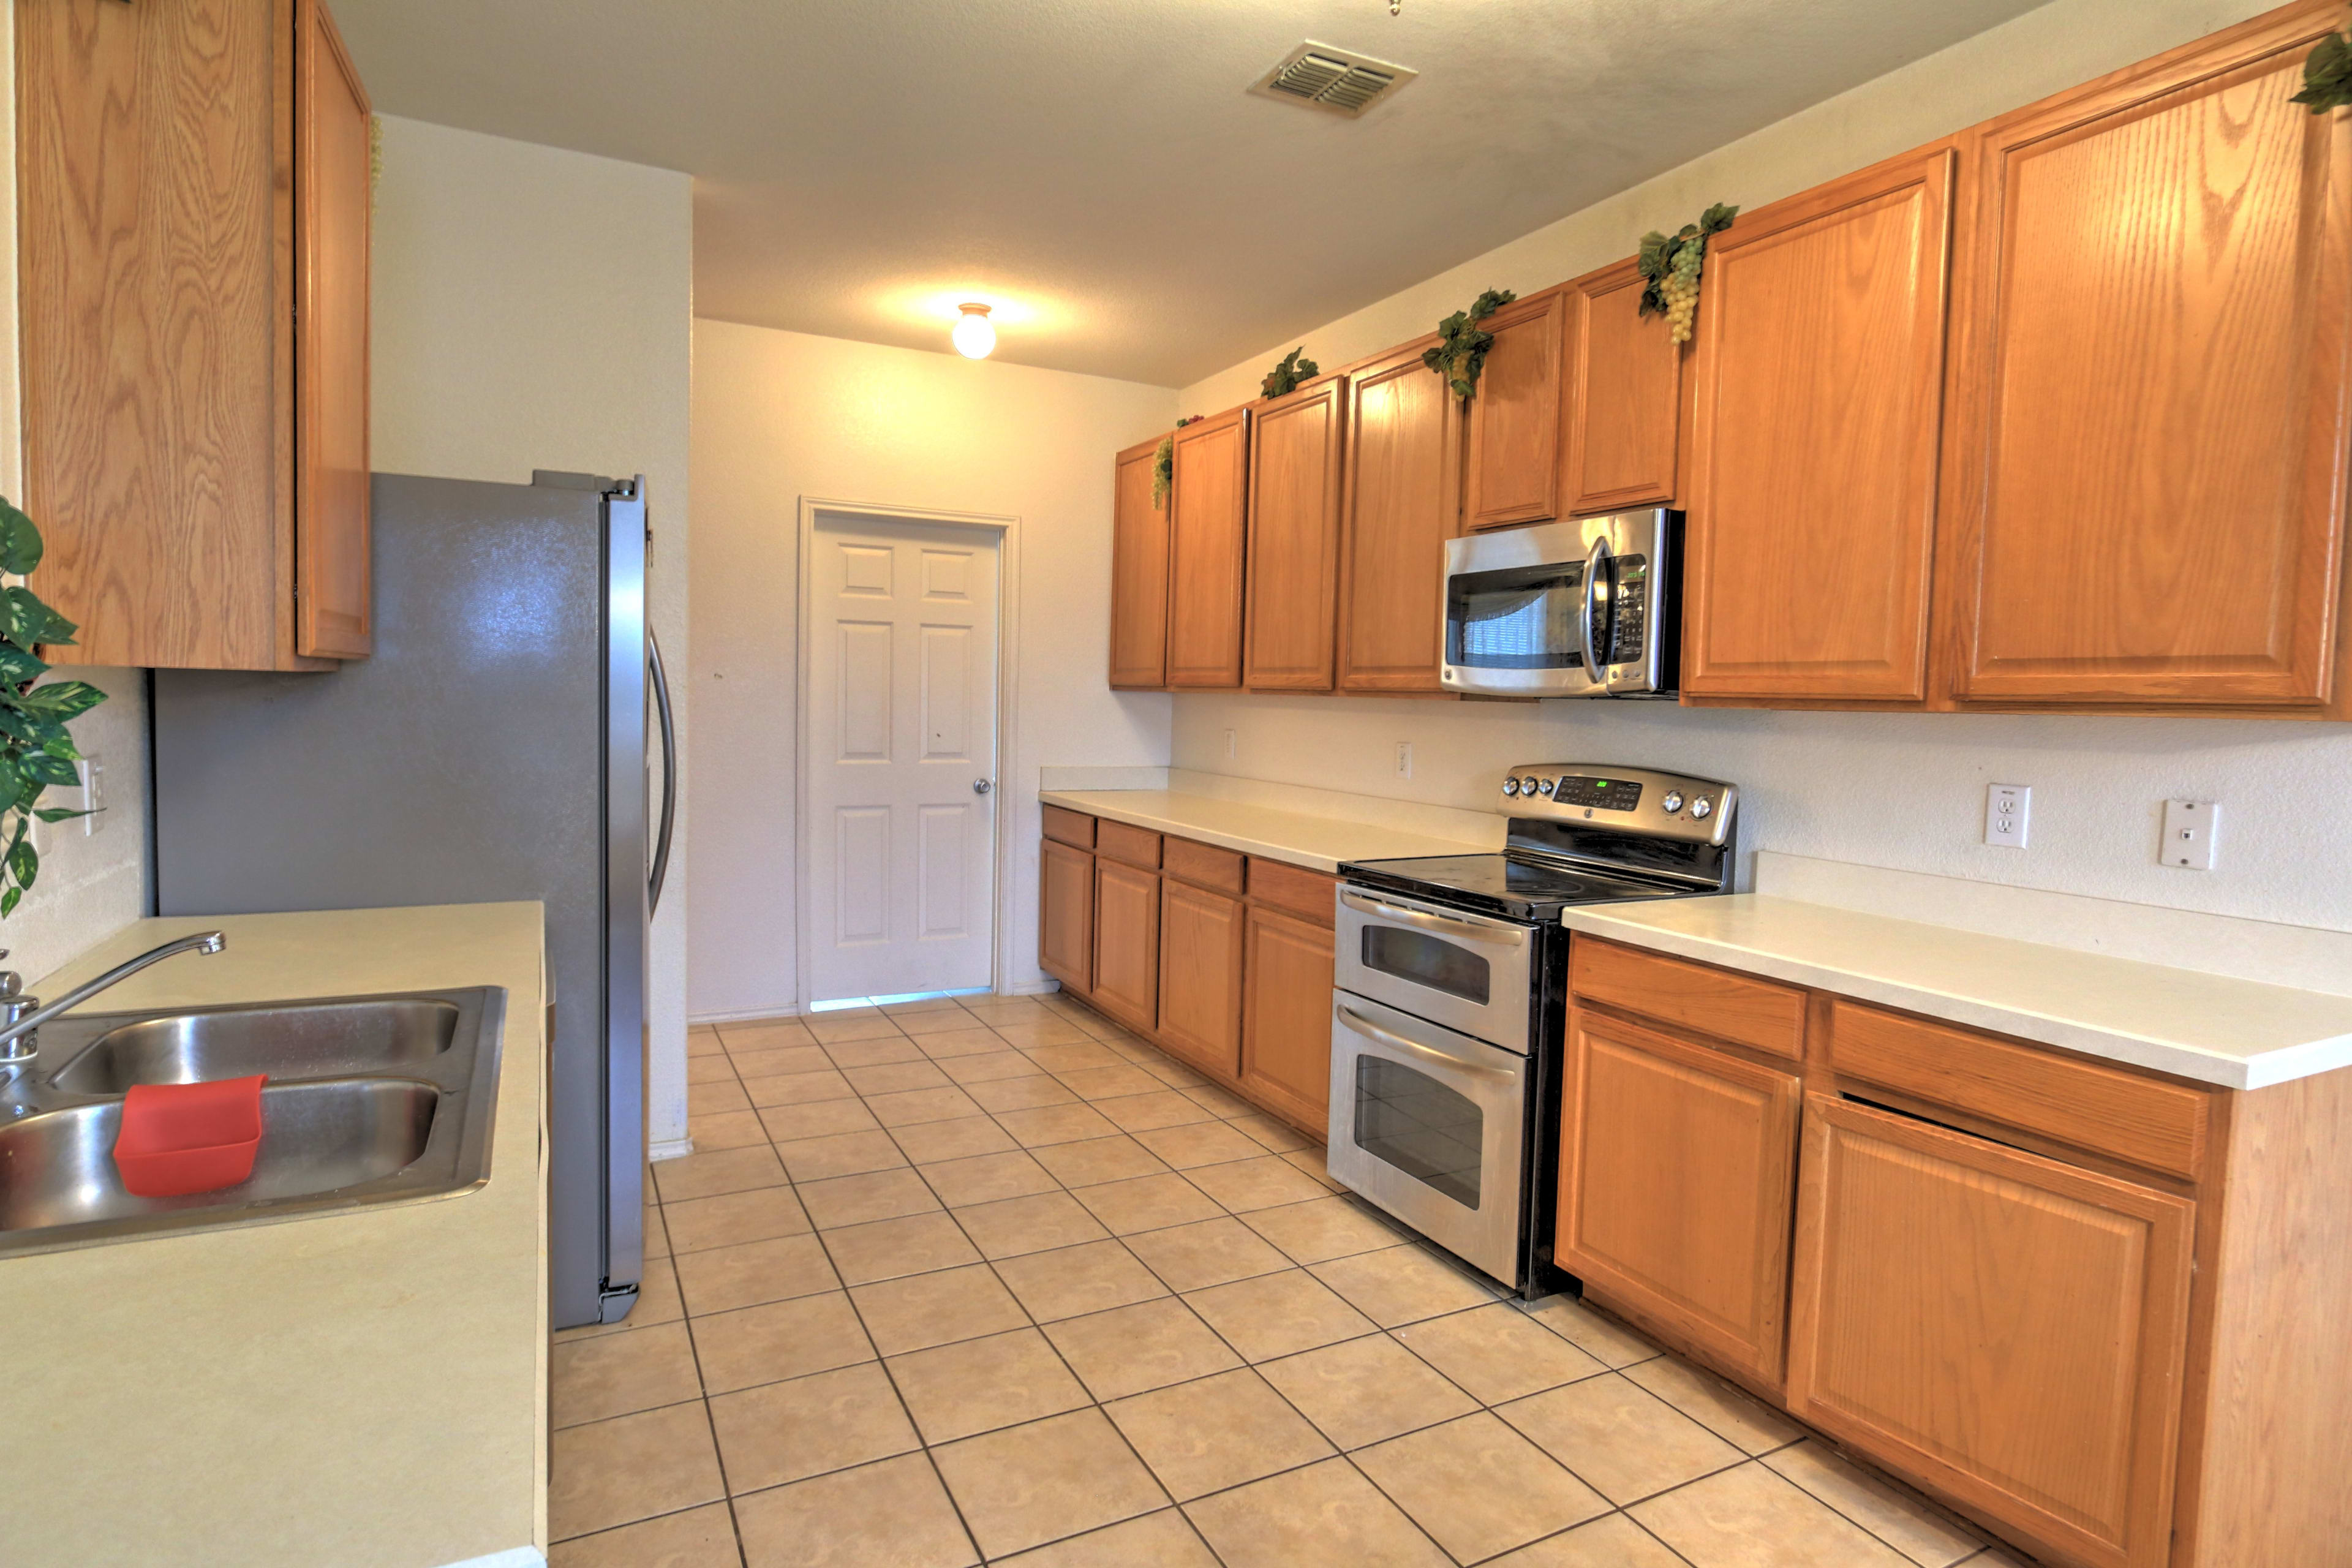 Prepare a home-cooked meal in the fully equipped kitchen.